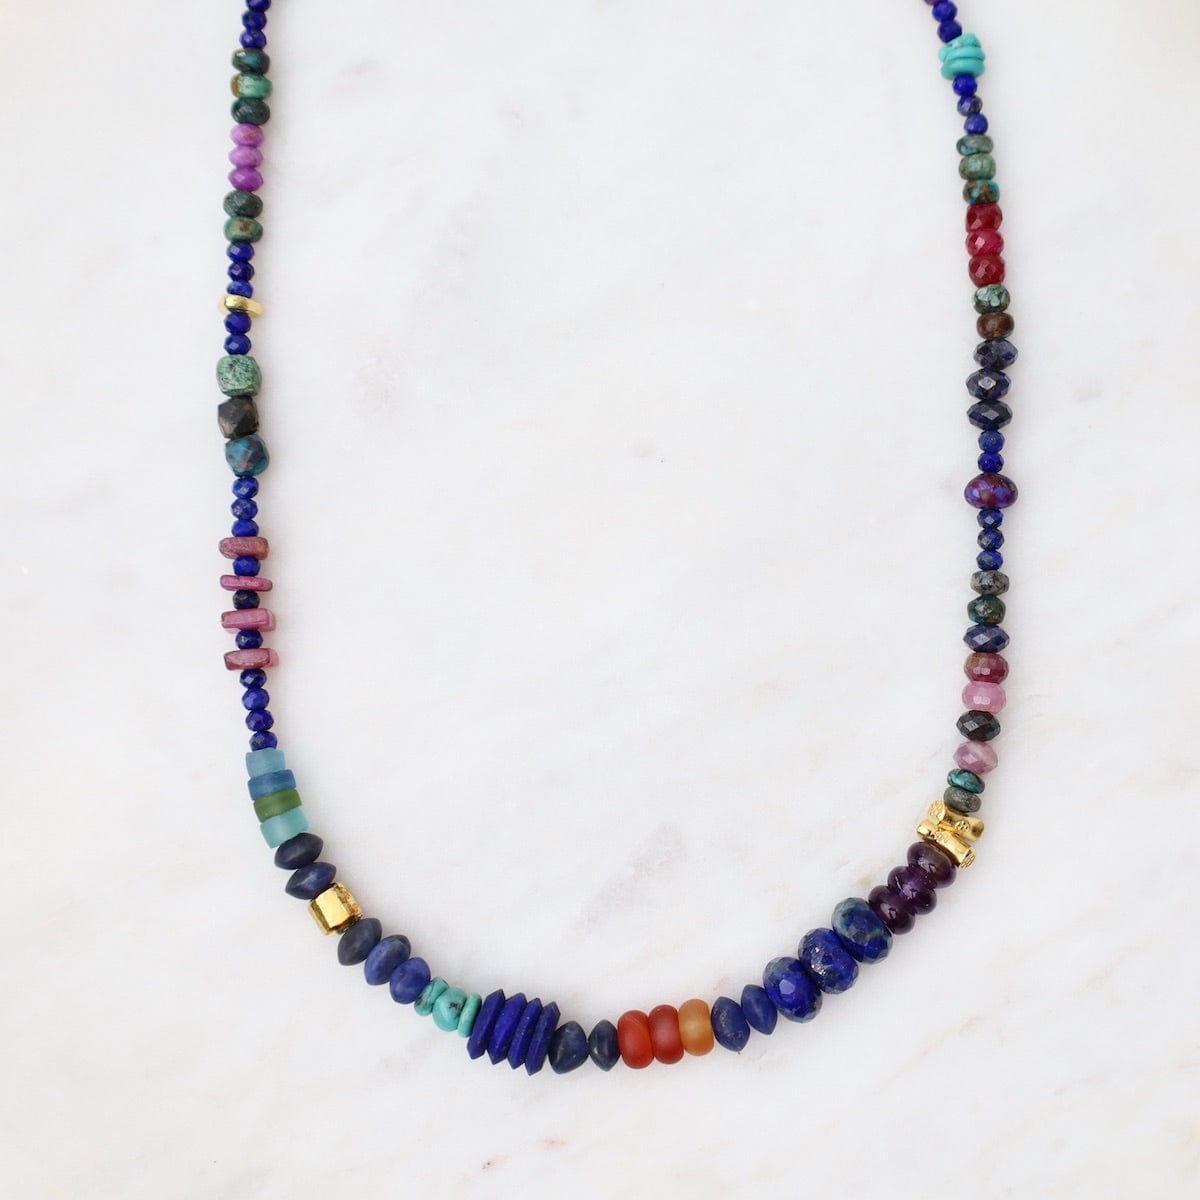 NKL-GPL Queen of the Nile Necklace in Lapis